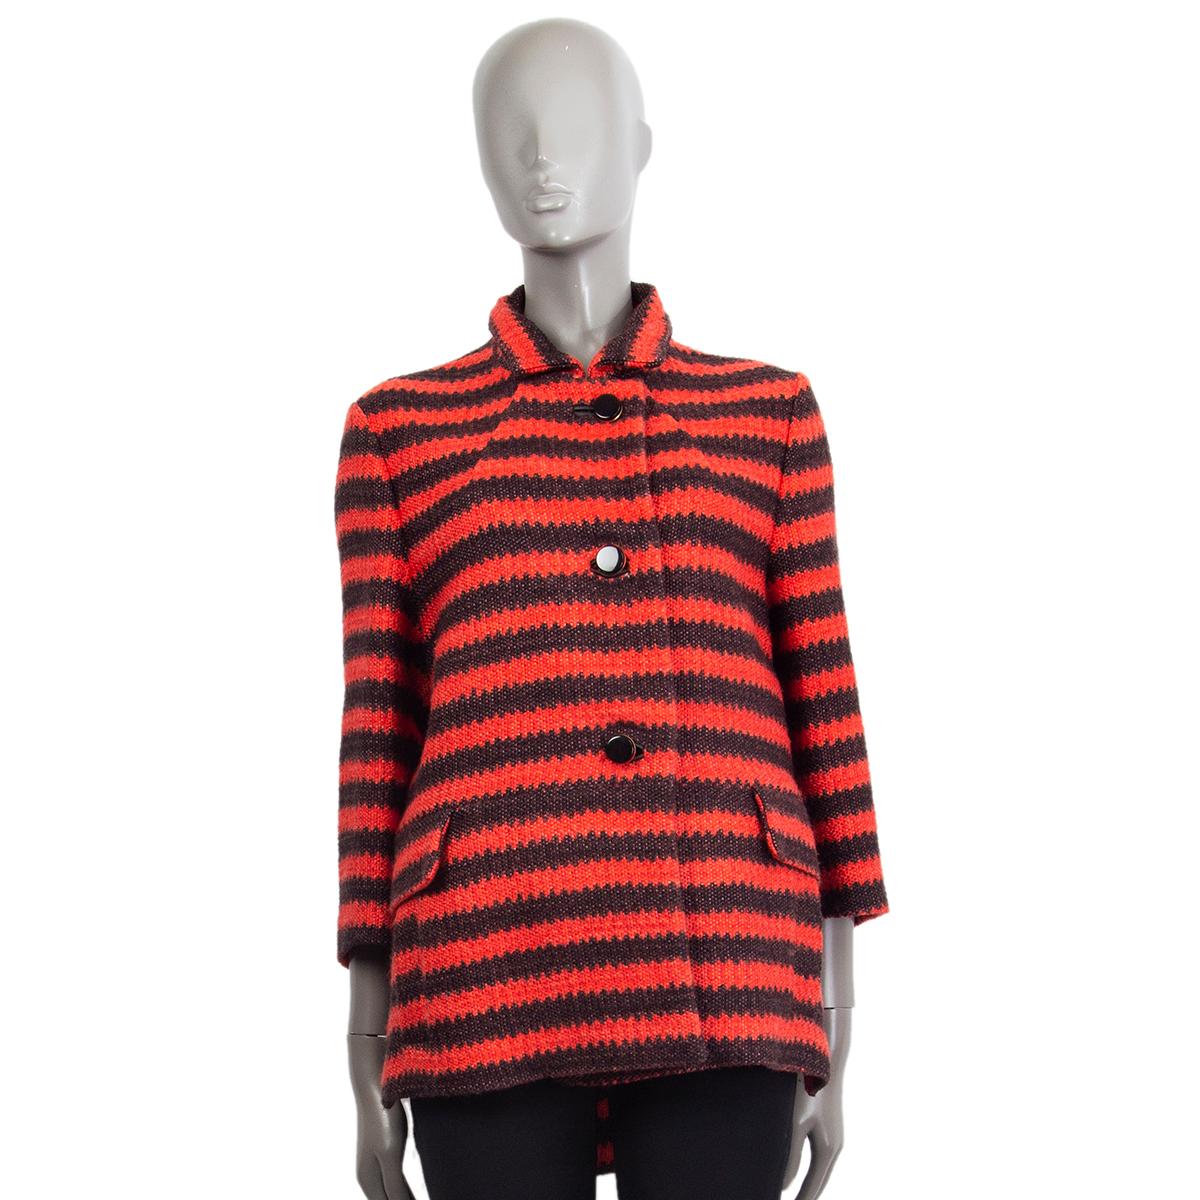 Women's MARNI black & coral wool STRIPED 3/4 SLEEVE KNIT Peacoat Coat Jacket 40 S For Sale